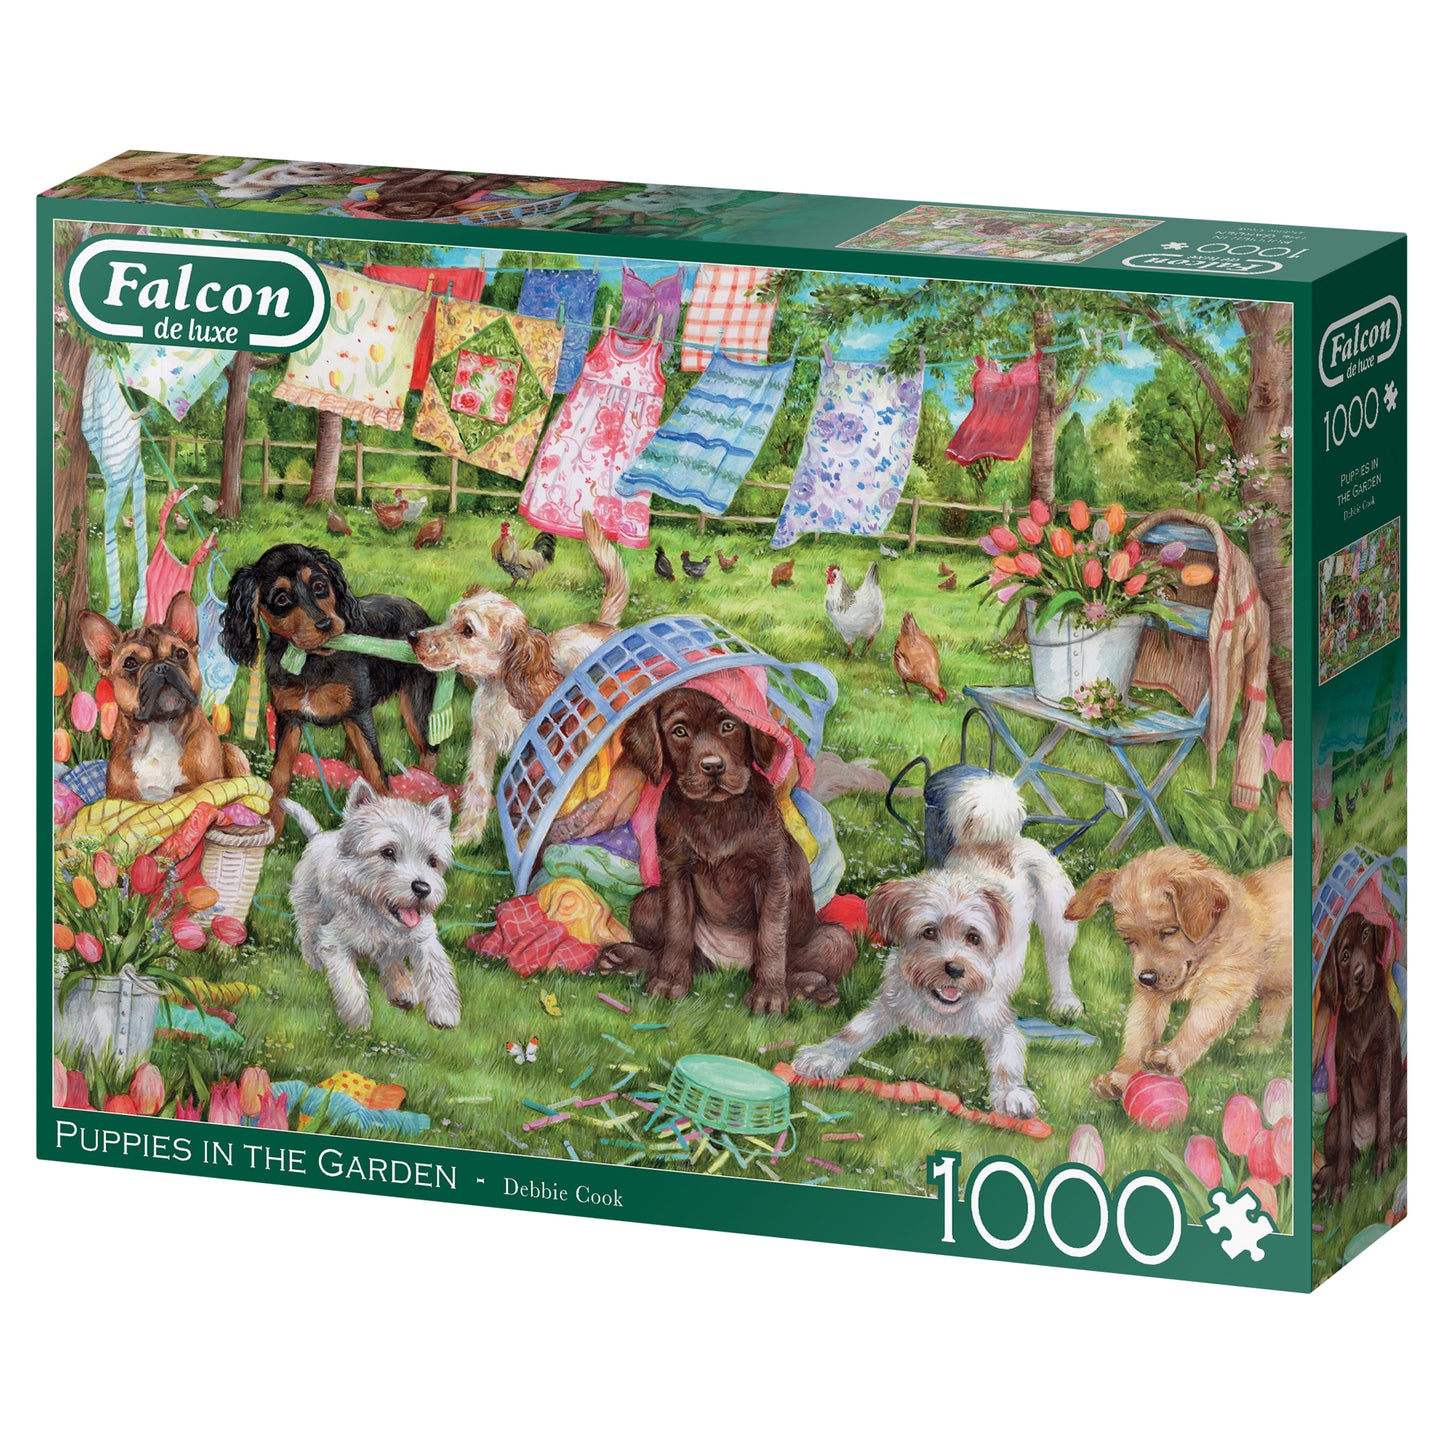 Falcon Puppies in the Garden 1000pcs - product image - Jumboplay.com